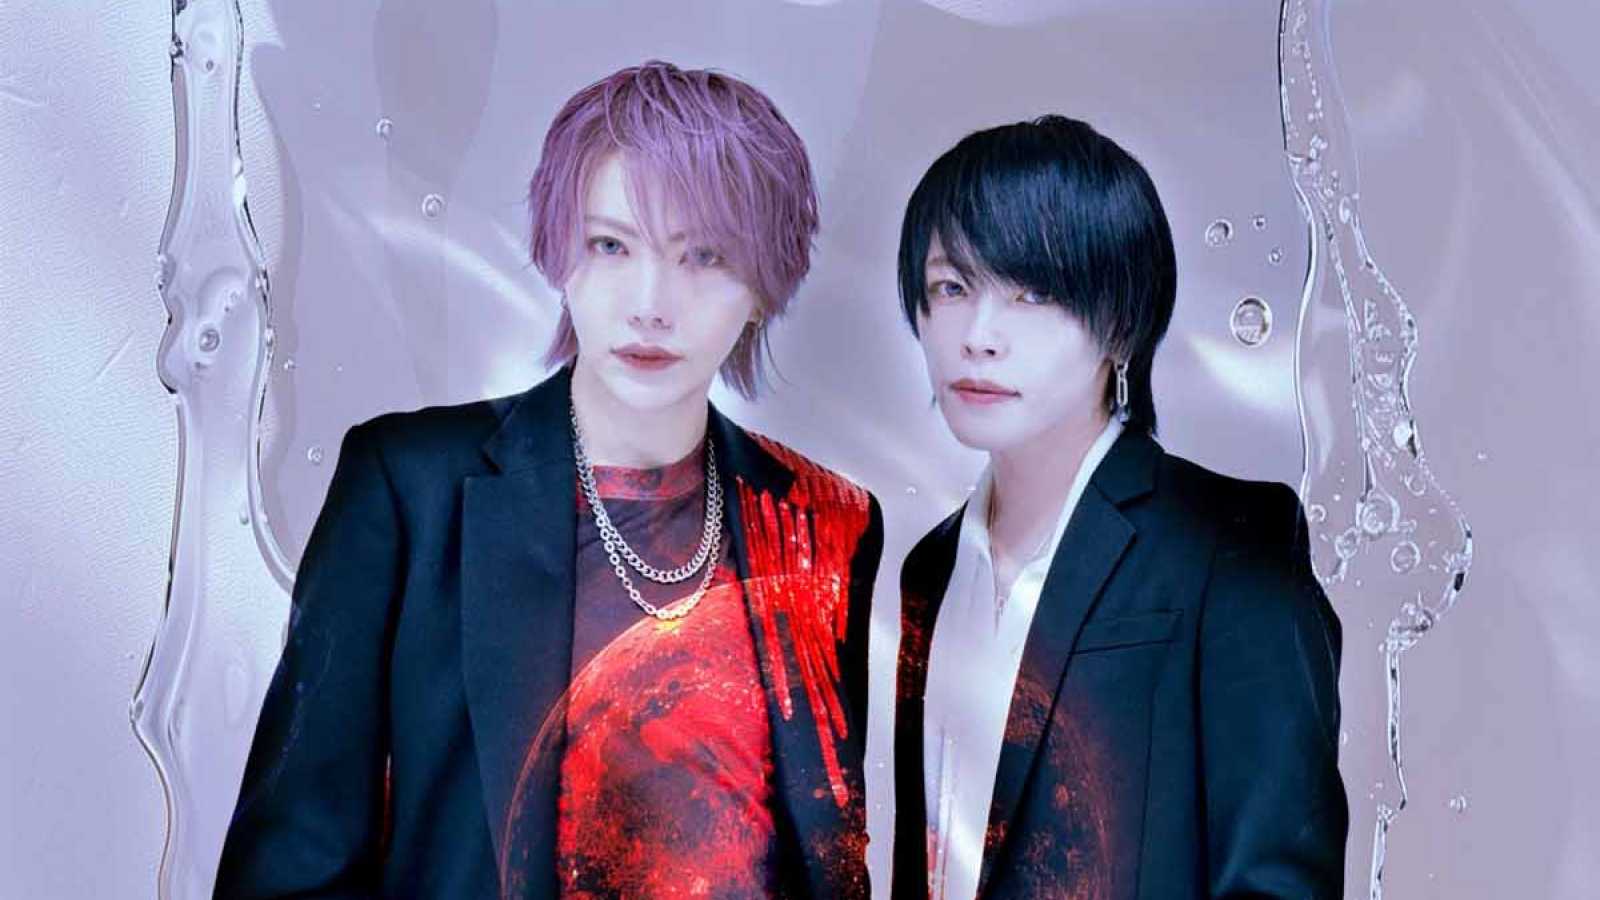 Verde/ Collaborates with [ kei ] for New Single "Lunaris/" © Verde/ x [ kei ]. All rights reserved.